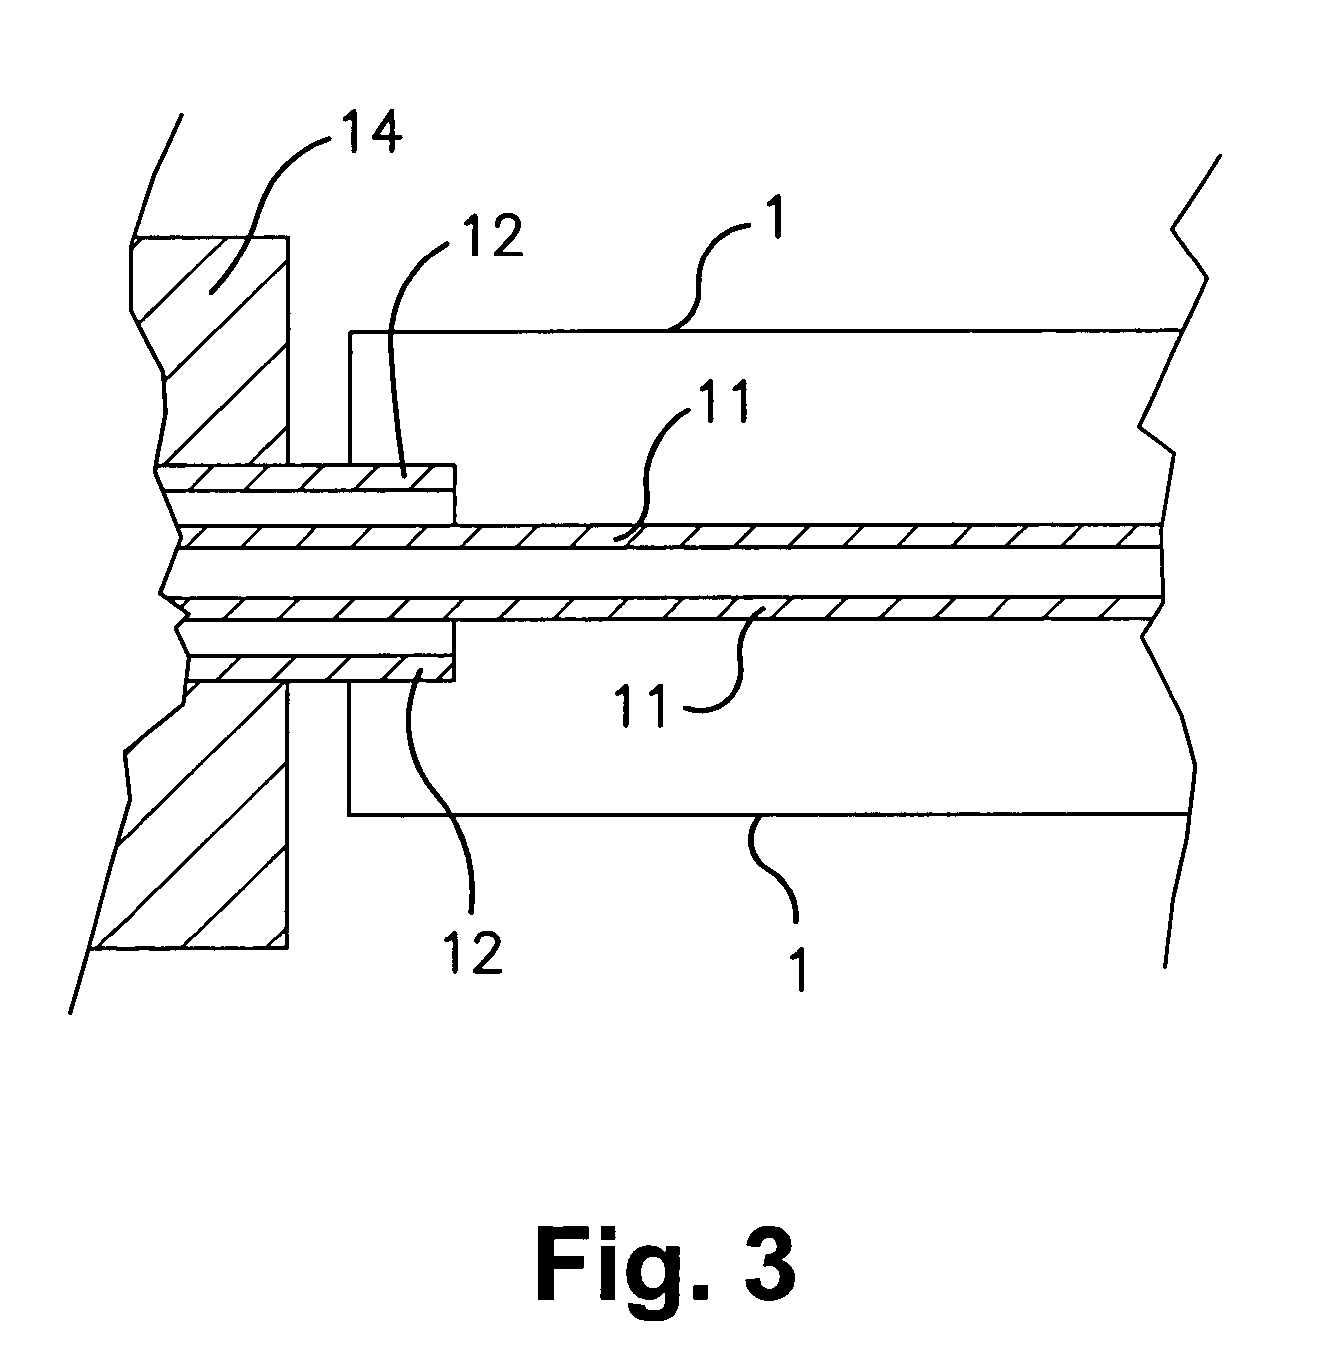 Sputtering target with bonding layer of varying thickness under target material